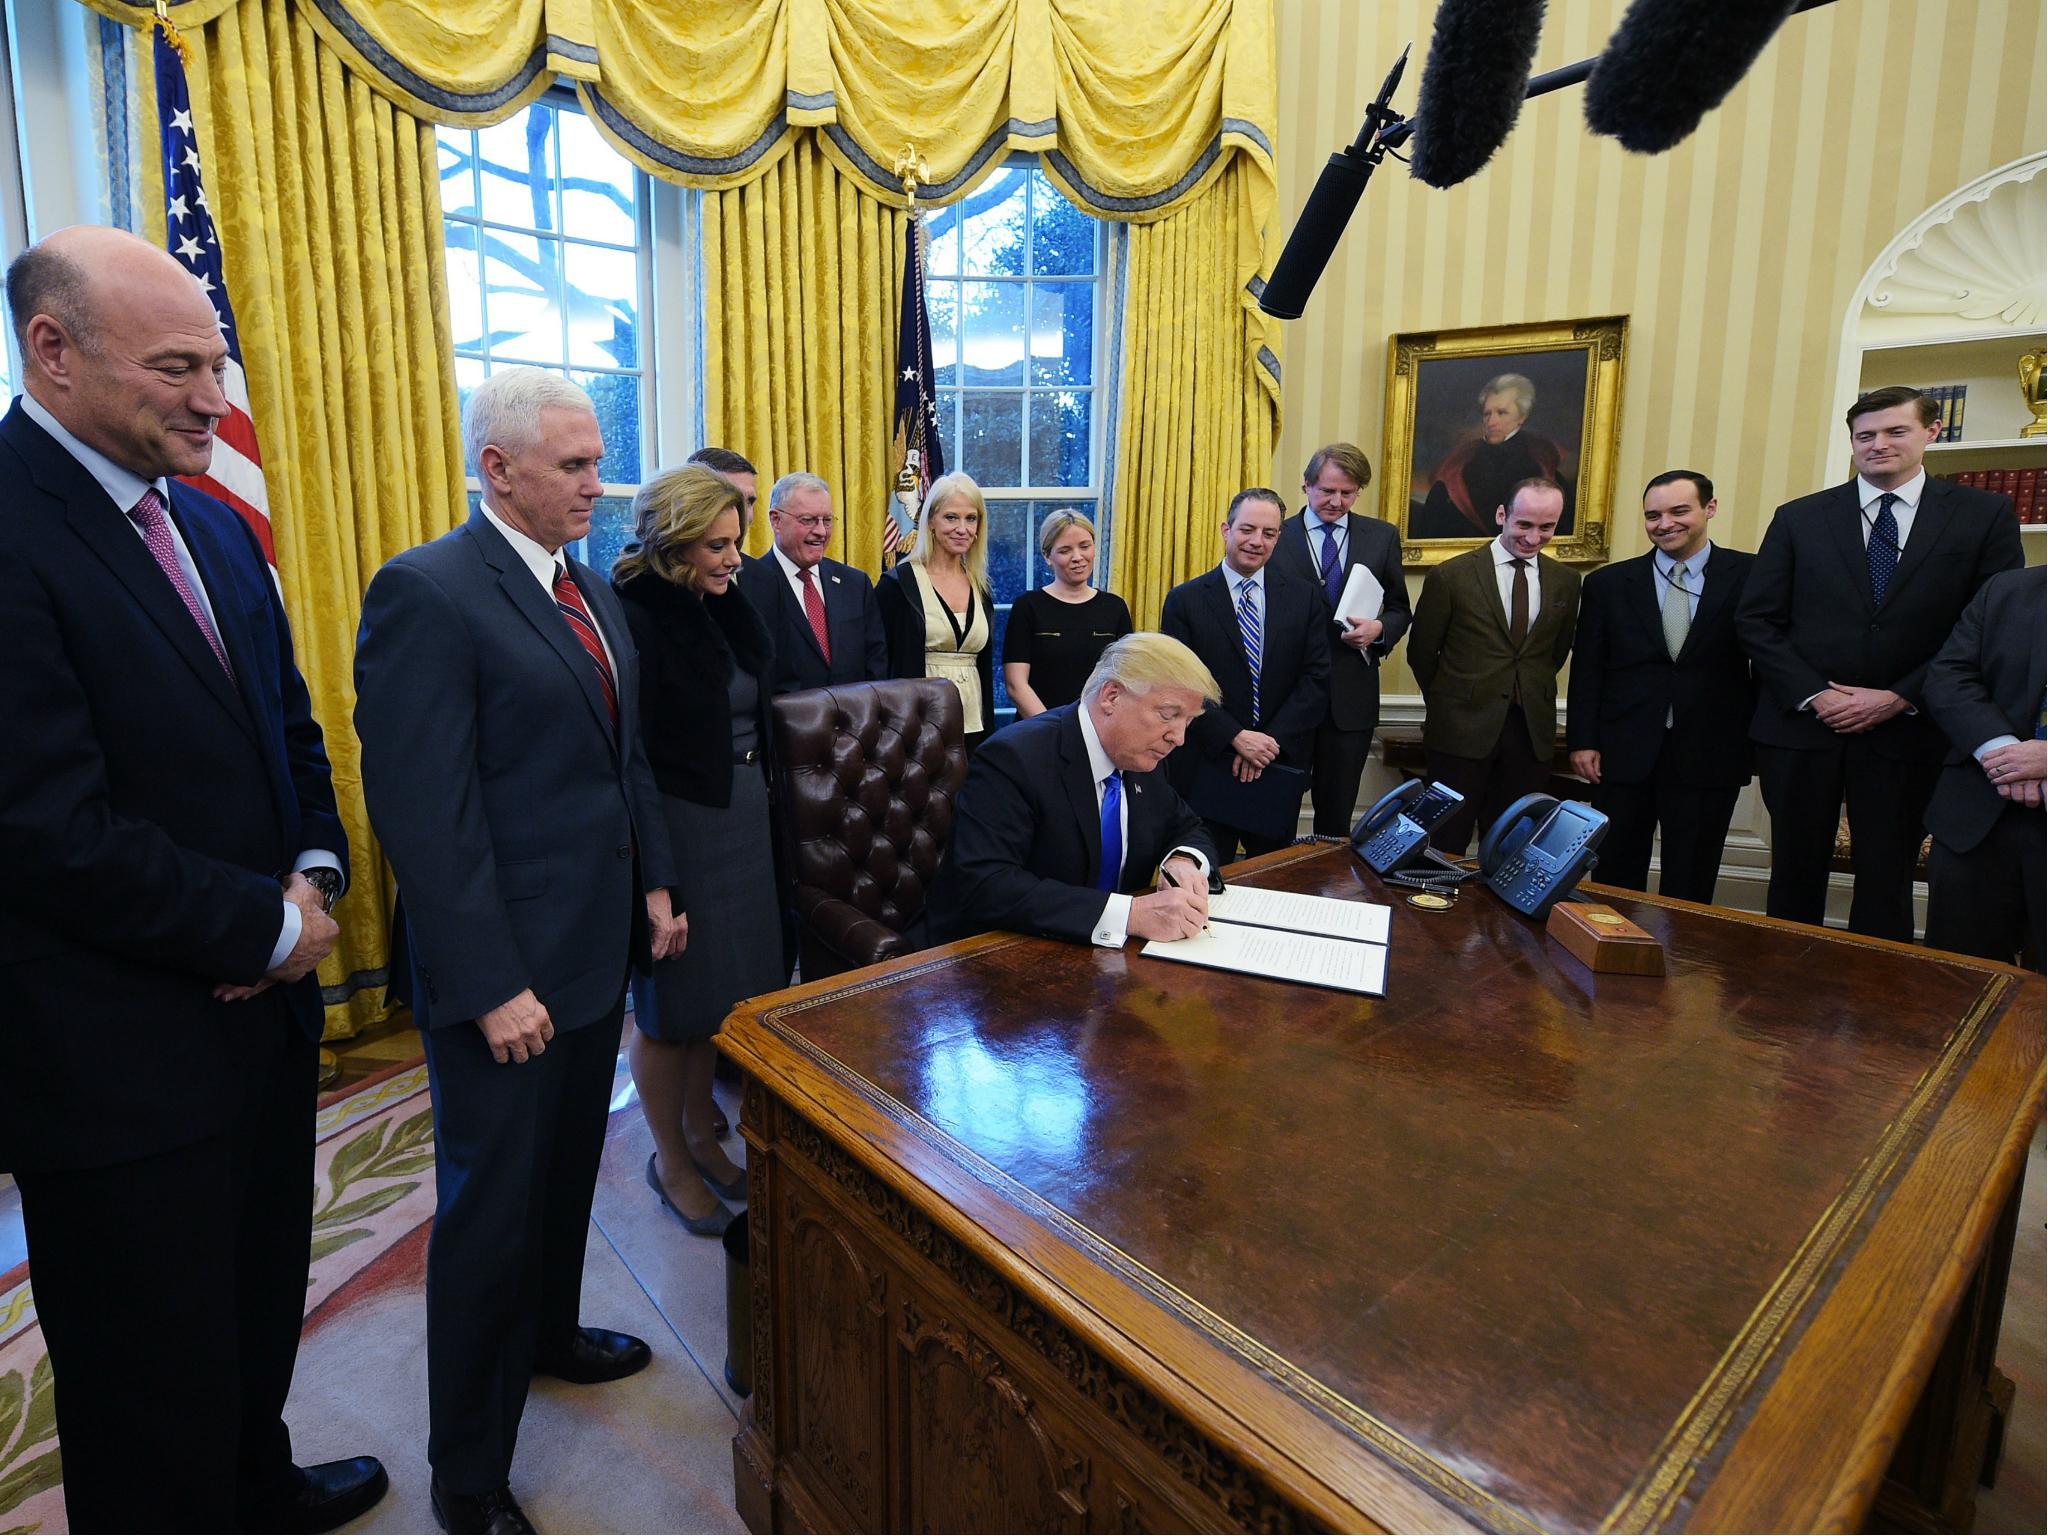 US President Donald Trump signs an executive order on ethics commitments by the executive branch appointees in the Oval Office on 28 January 2017